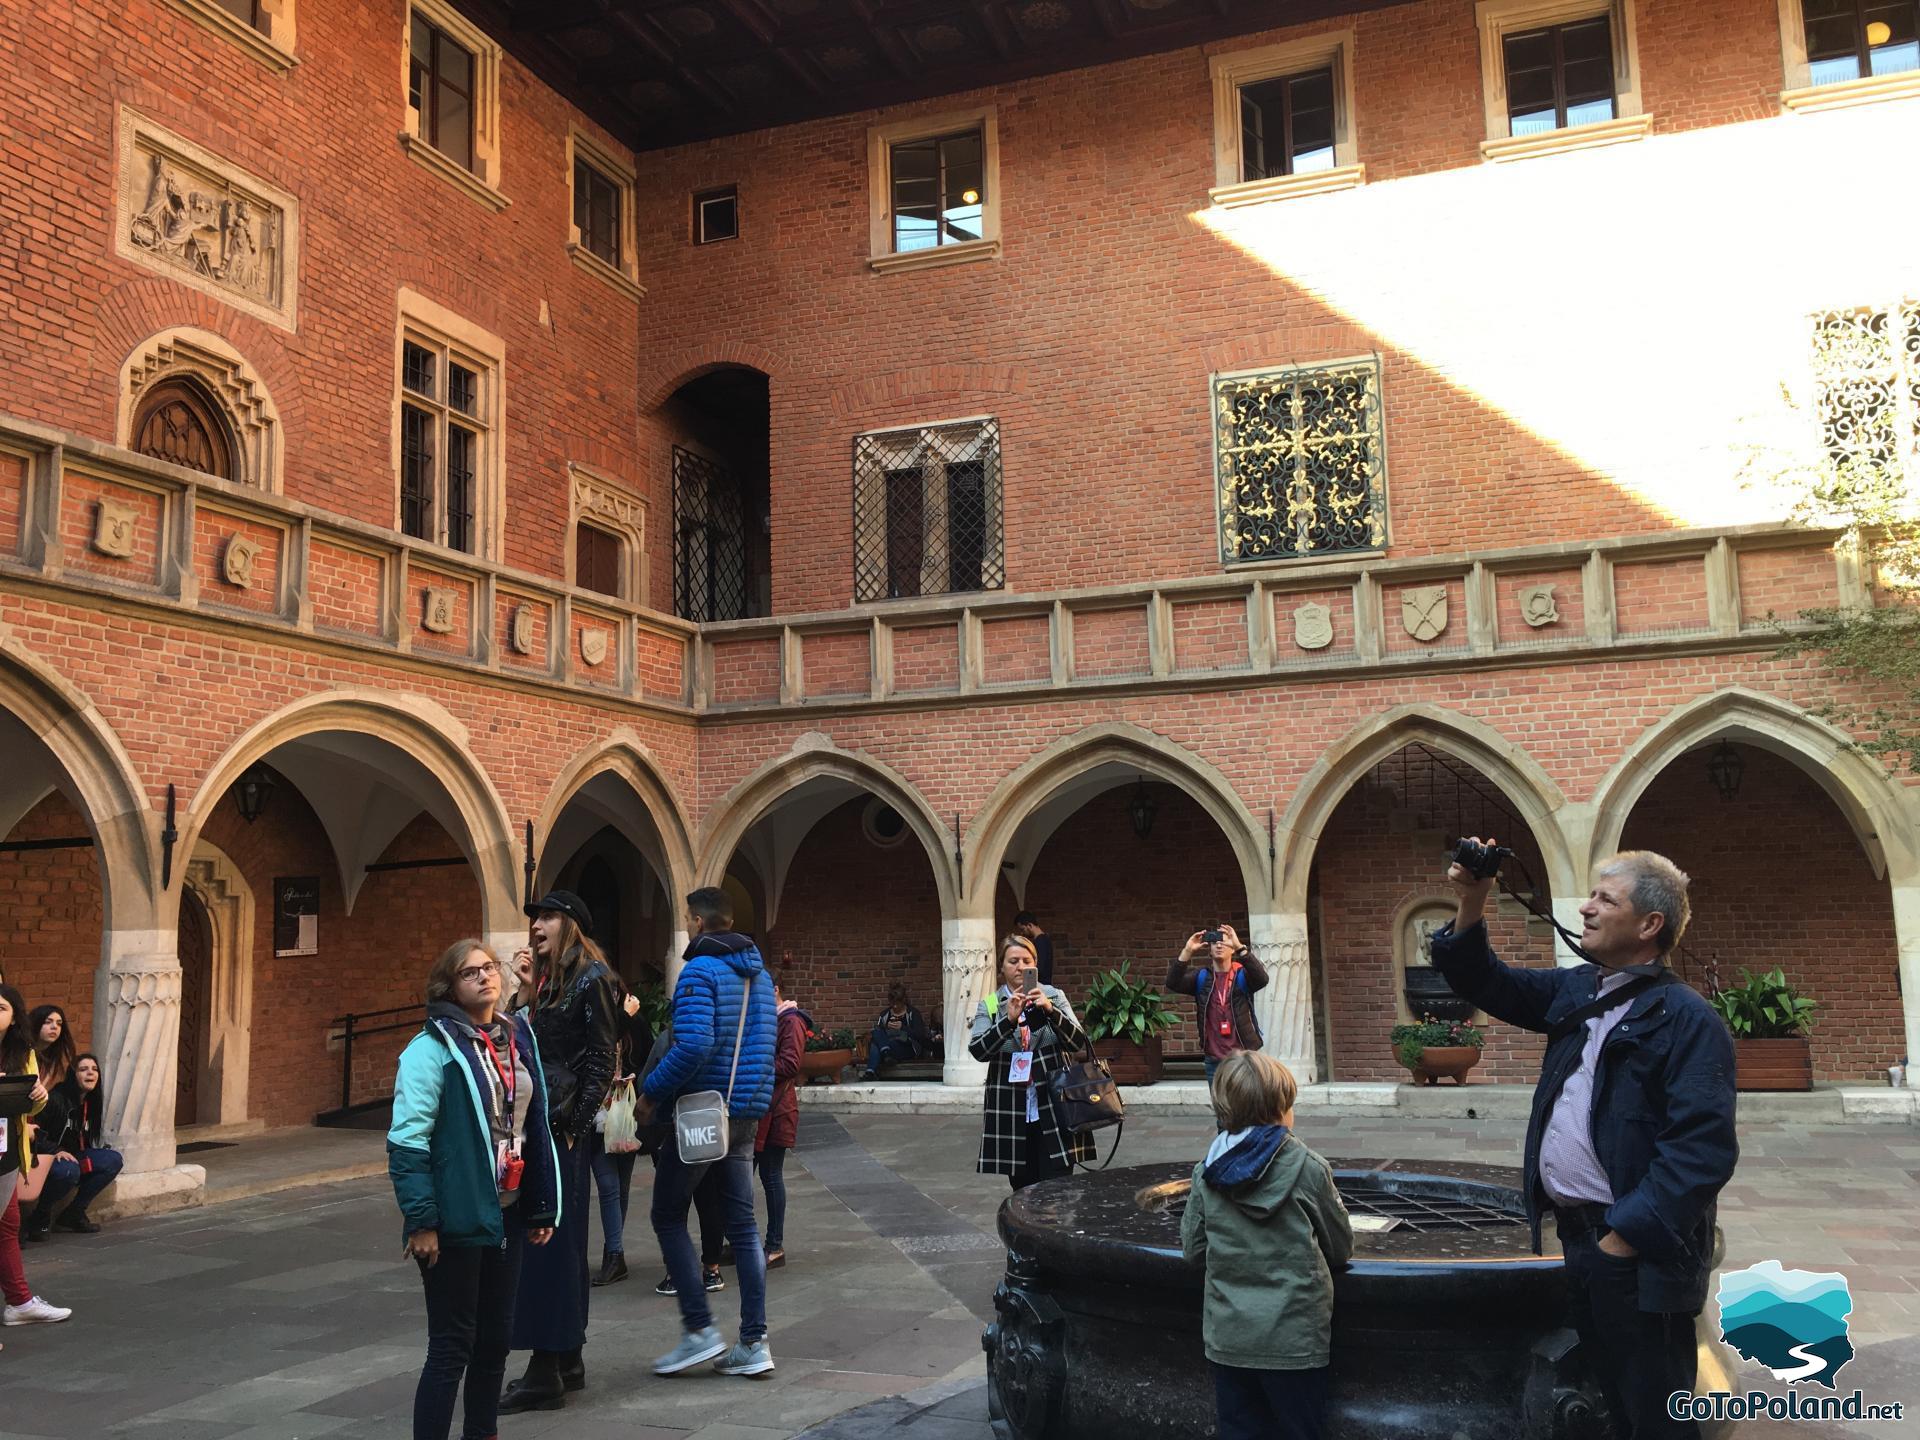 a group of young people in the courtyard of the Jagiellonian University